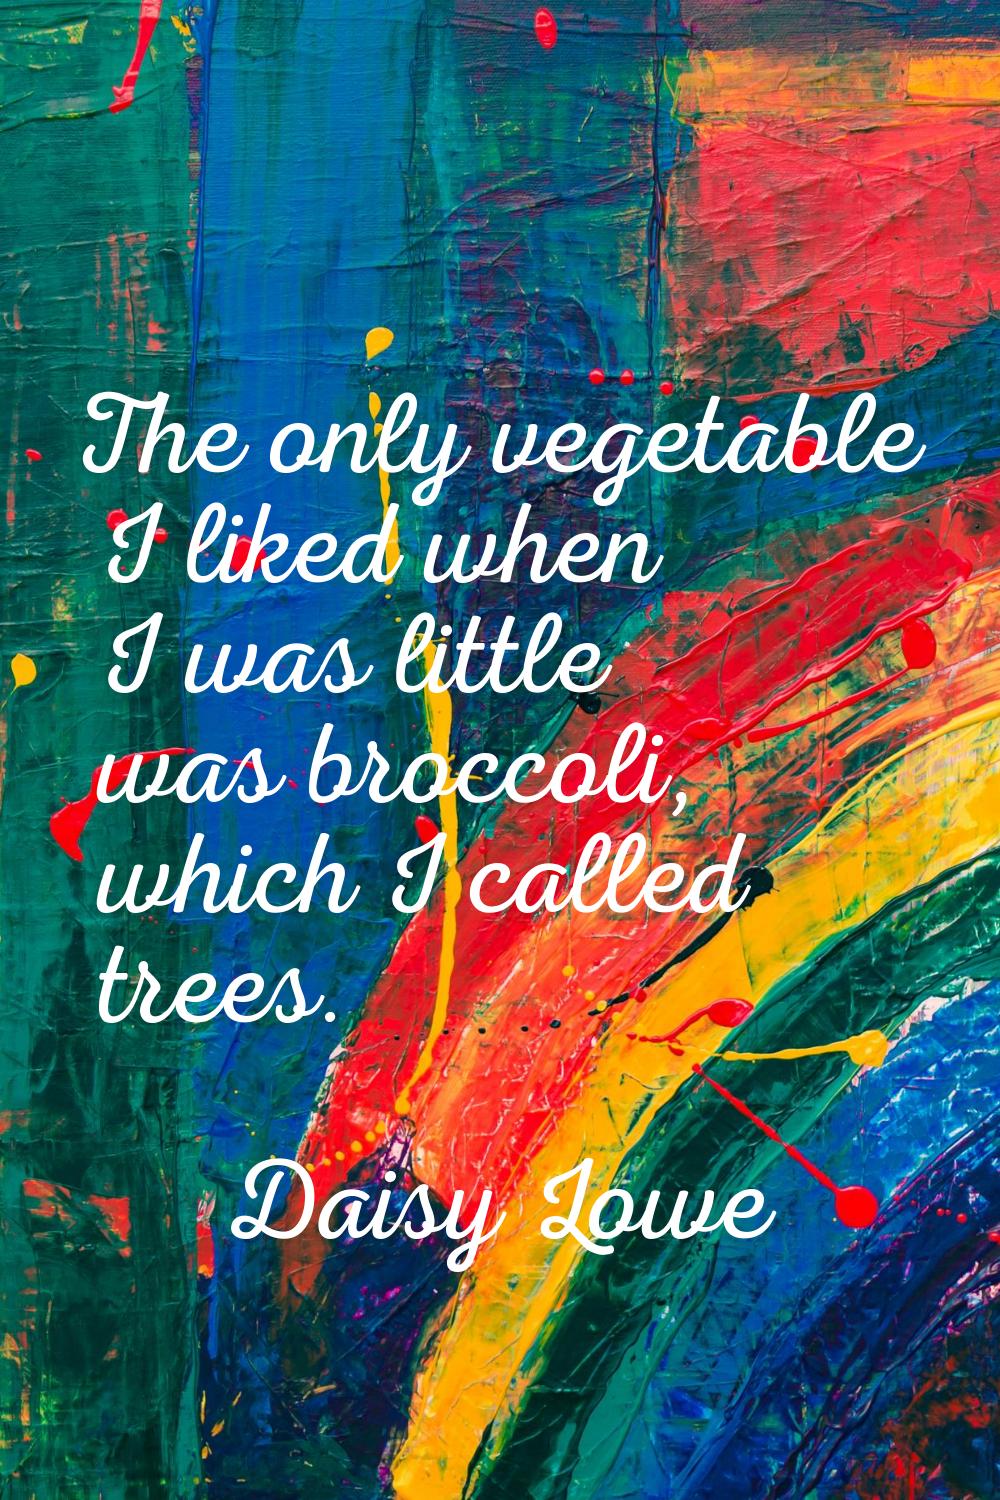 The only vegetable I liked when I was little was broccoli, which I called trees.